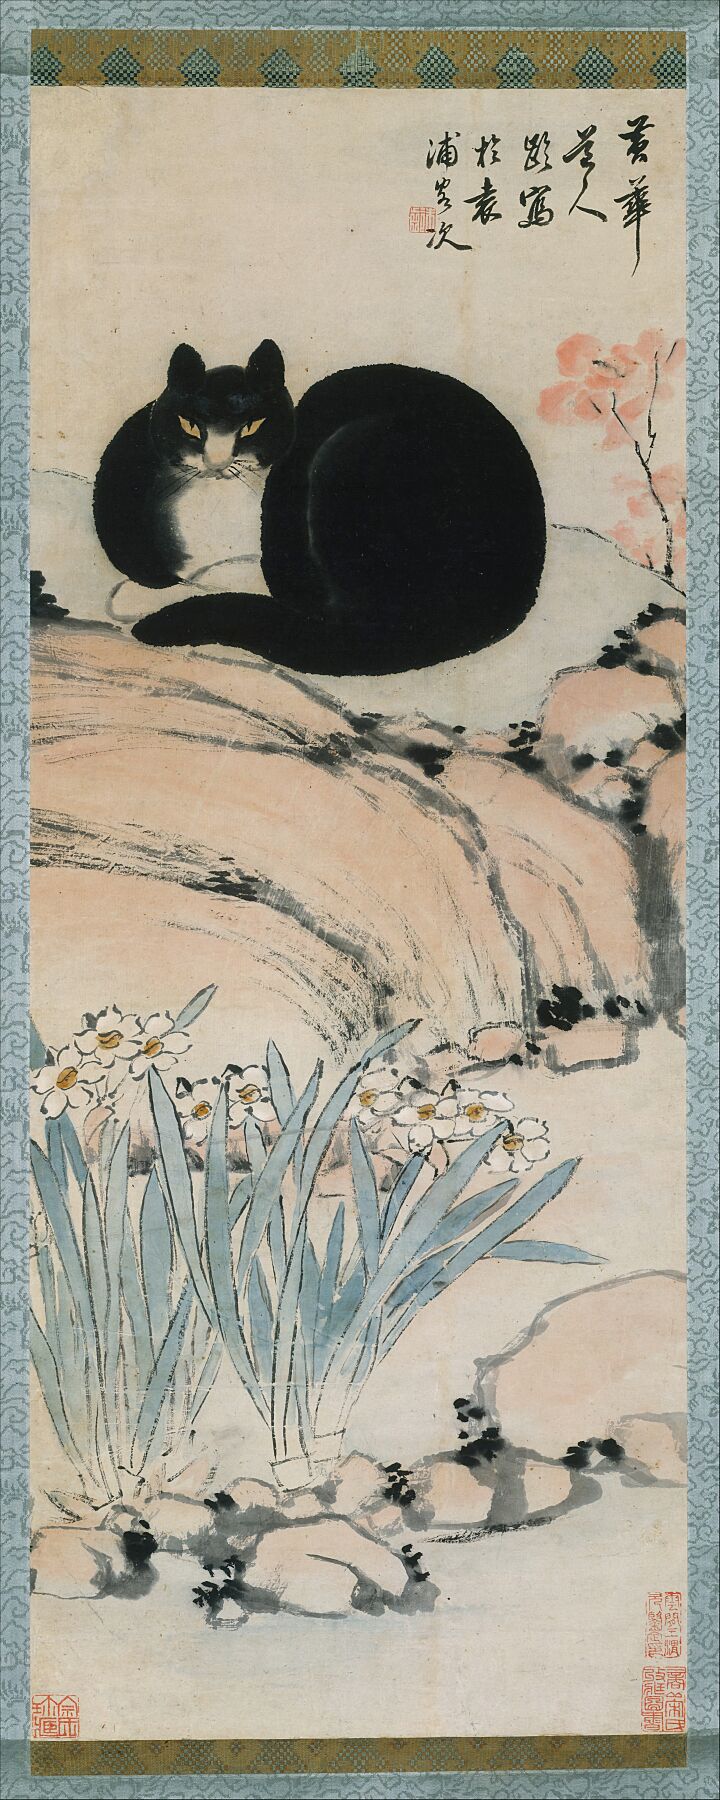 Black Cat and Narcissus by Zhu Ling - 19th Century